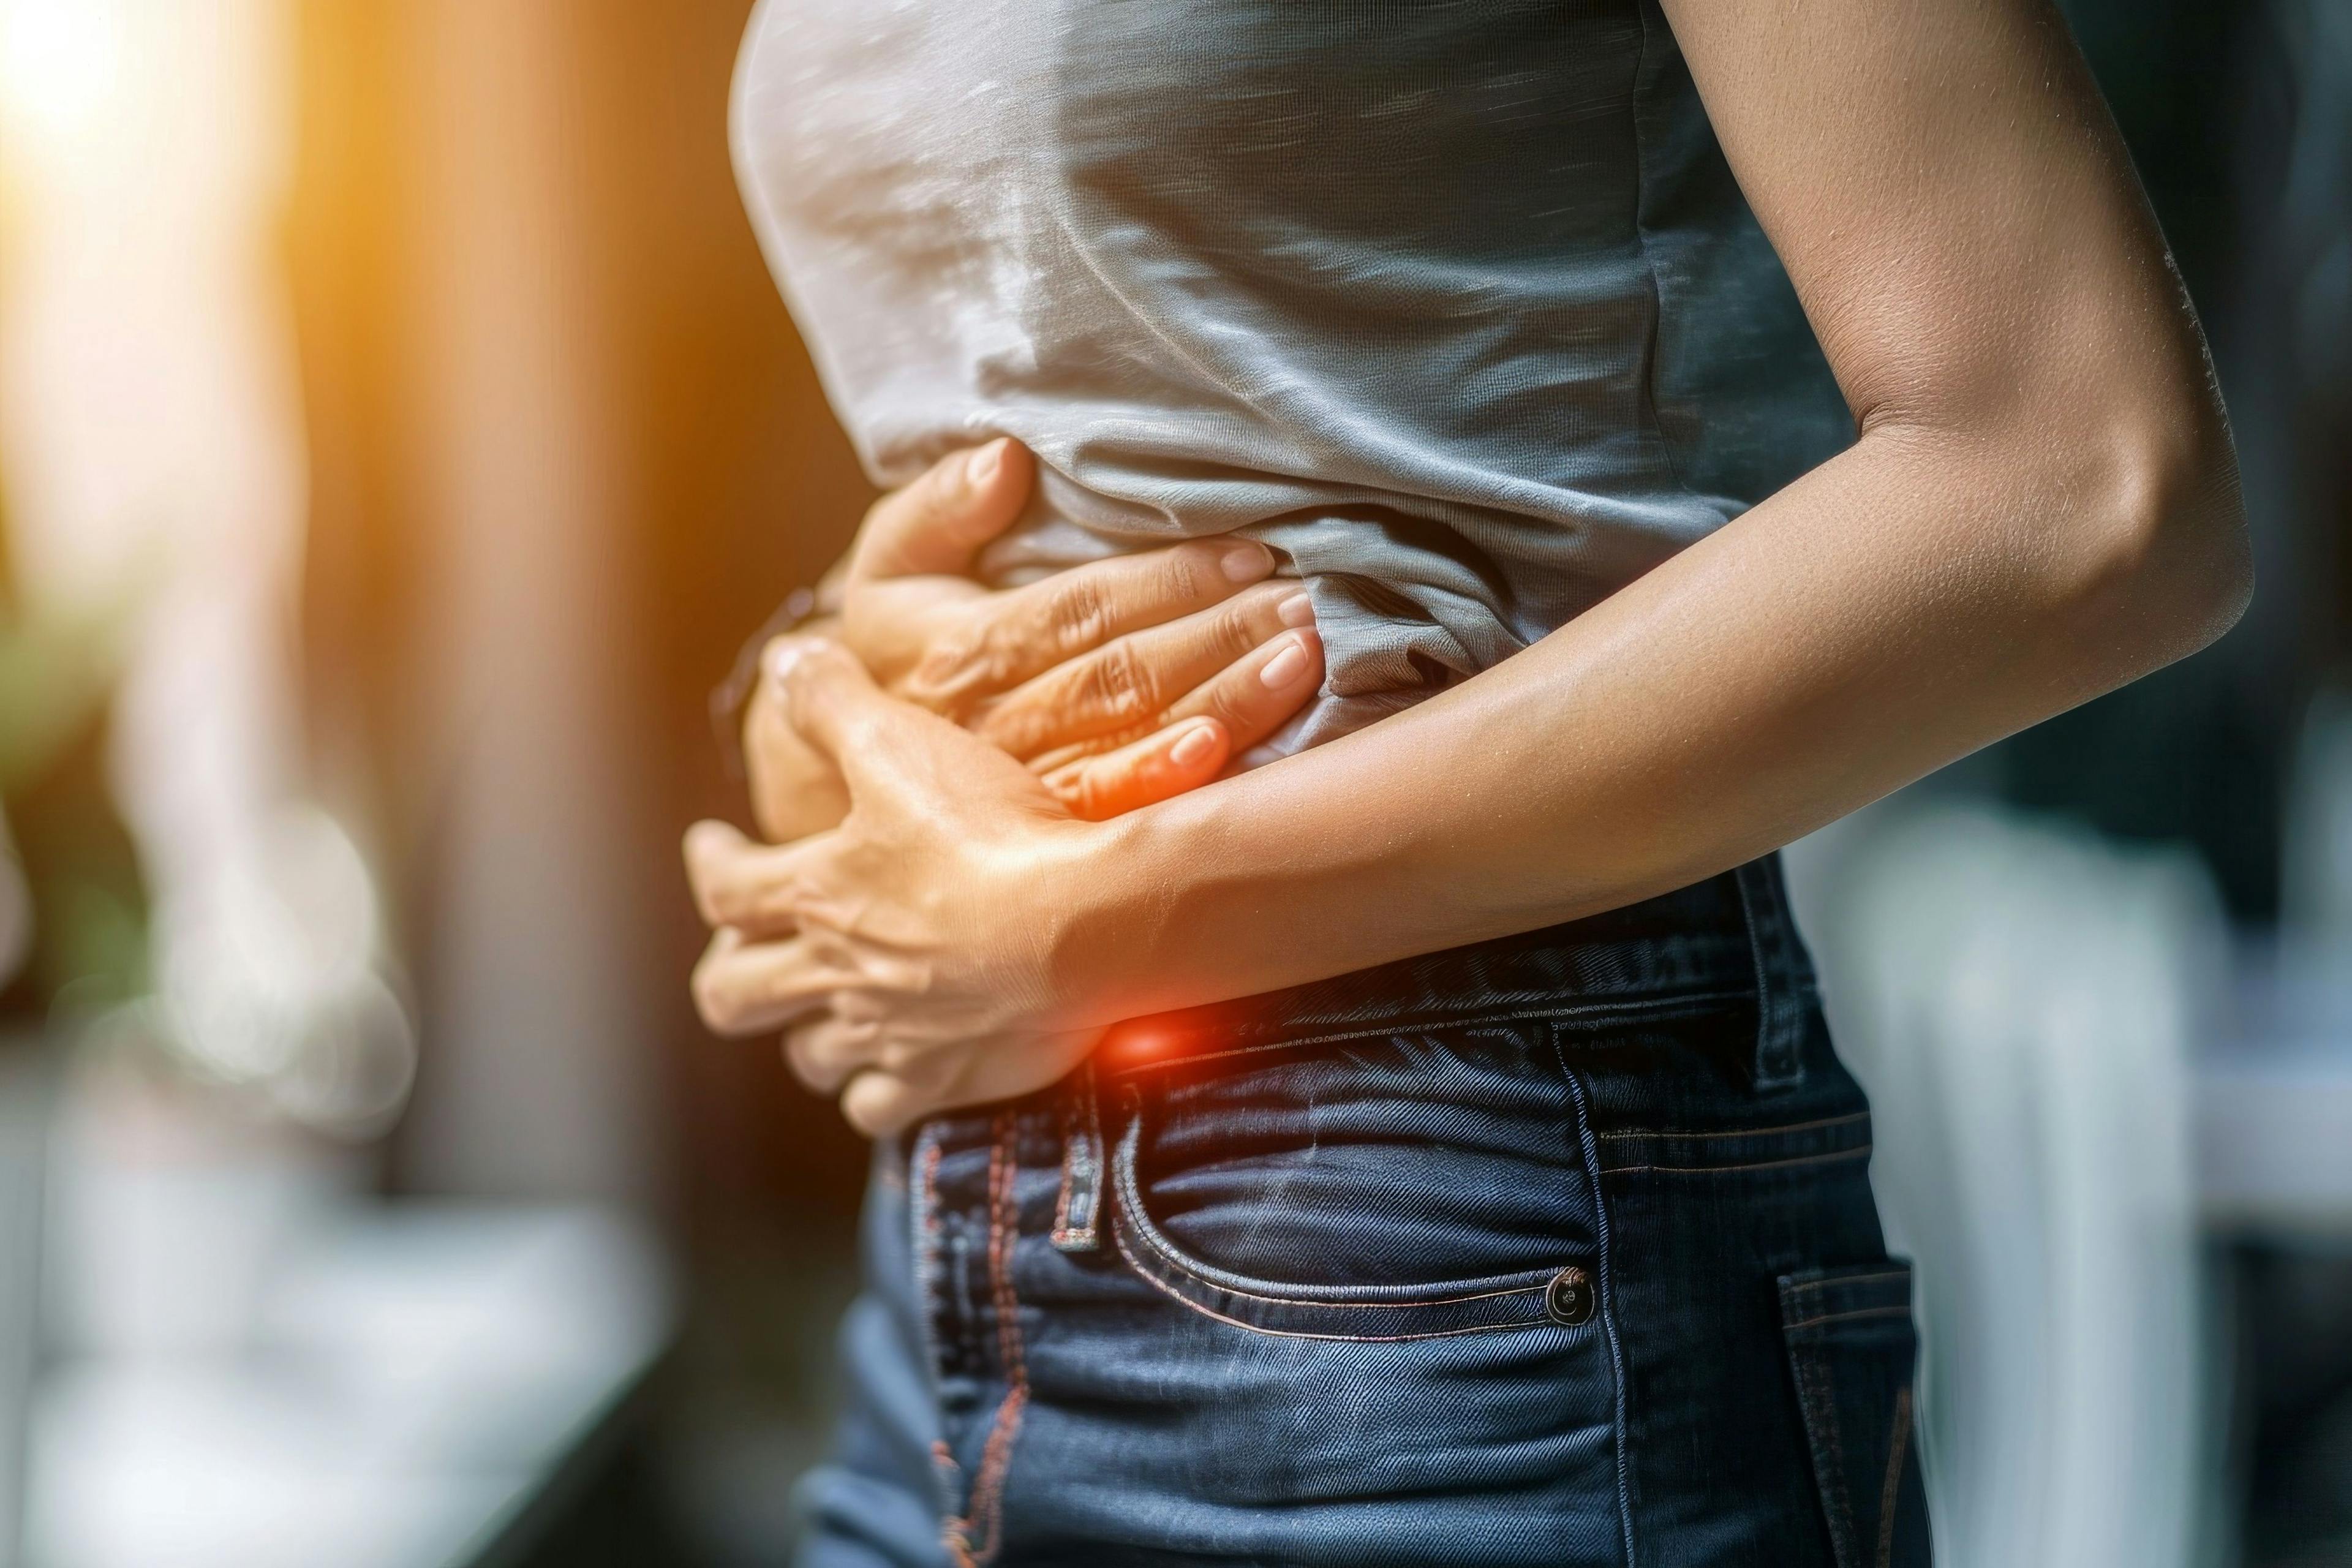 AI generated image of a patients with Crohn's disease | Image credit: AIExplosion - stock.adobe.com